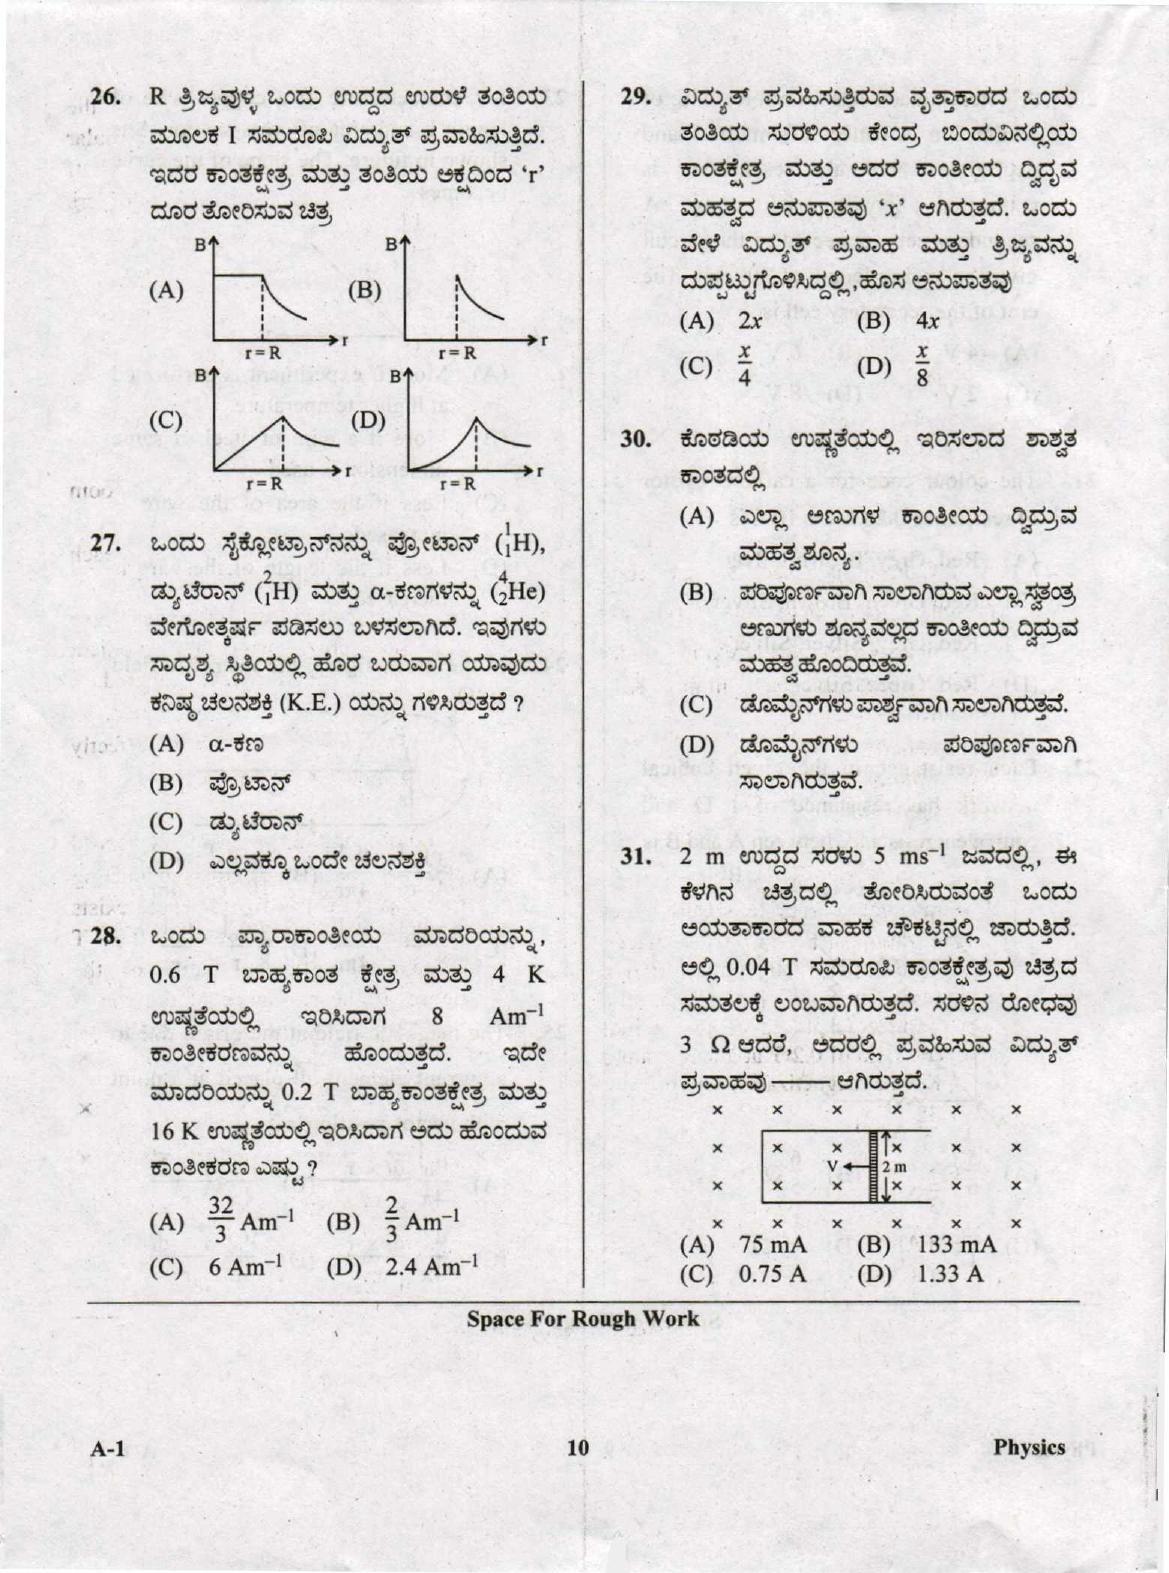 KCET Physics 2020 Question Papers - Page 10